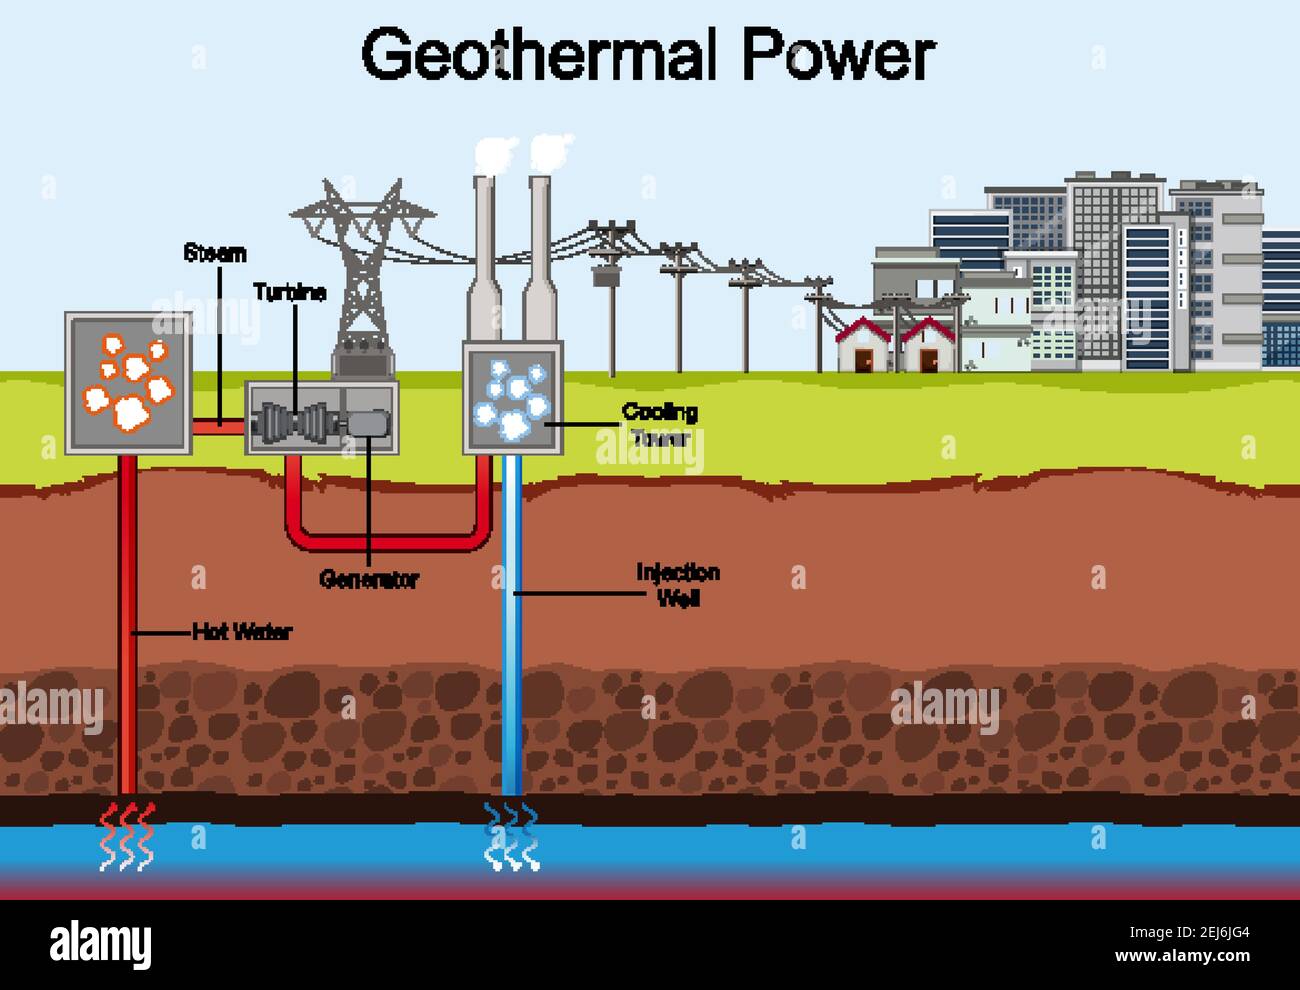 Renewable Energy Sources Components Of Geothermal Power Plant Ppt  Powerpoint Presentation Diagram